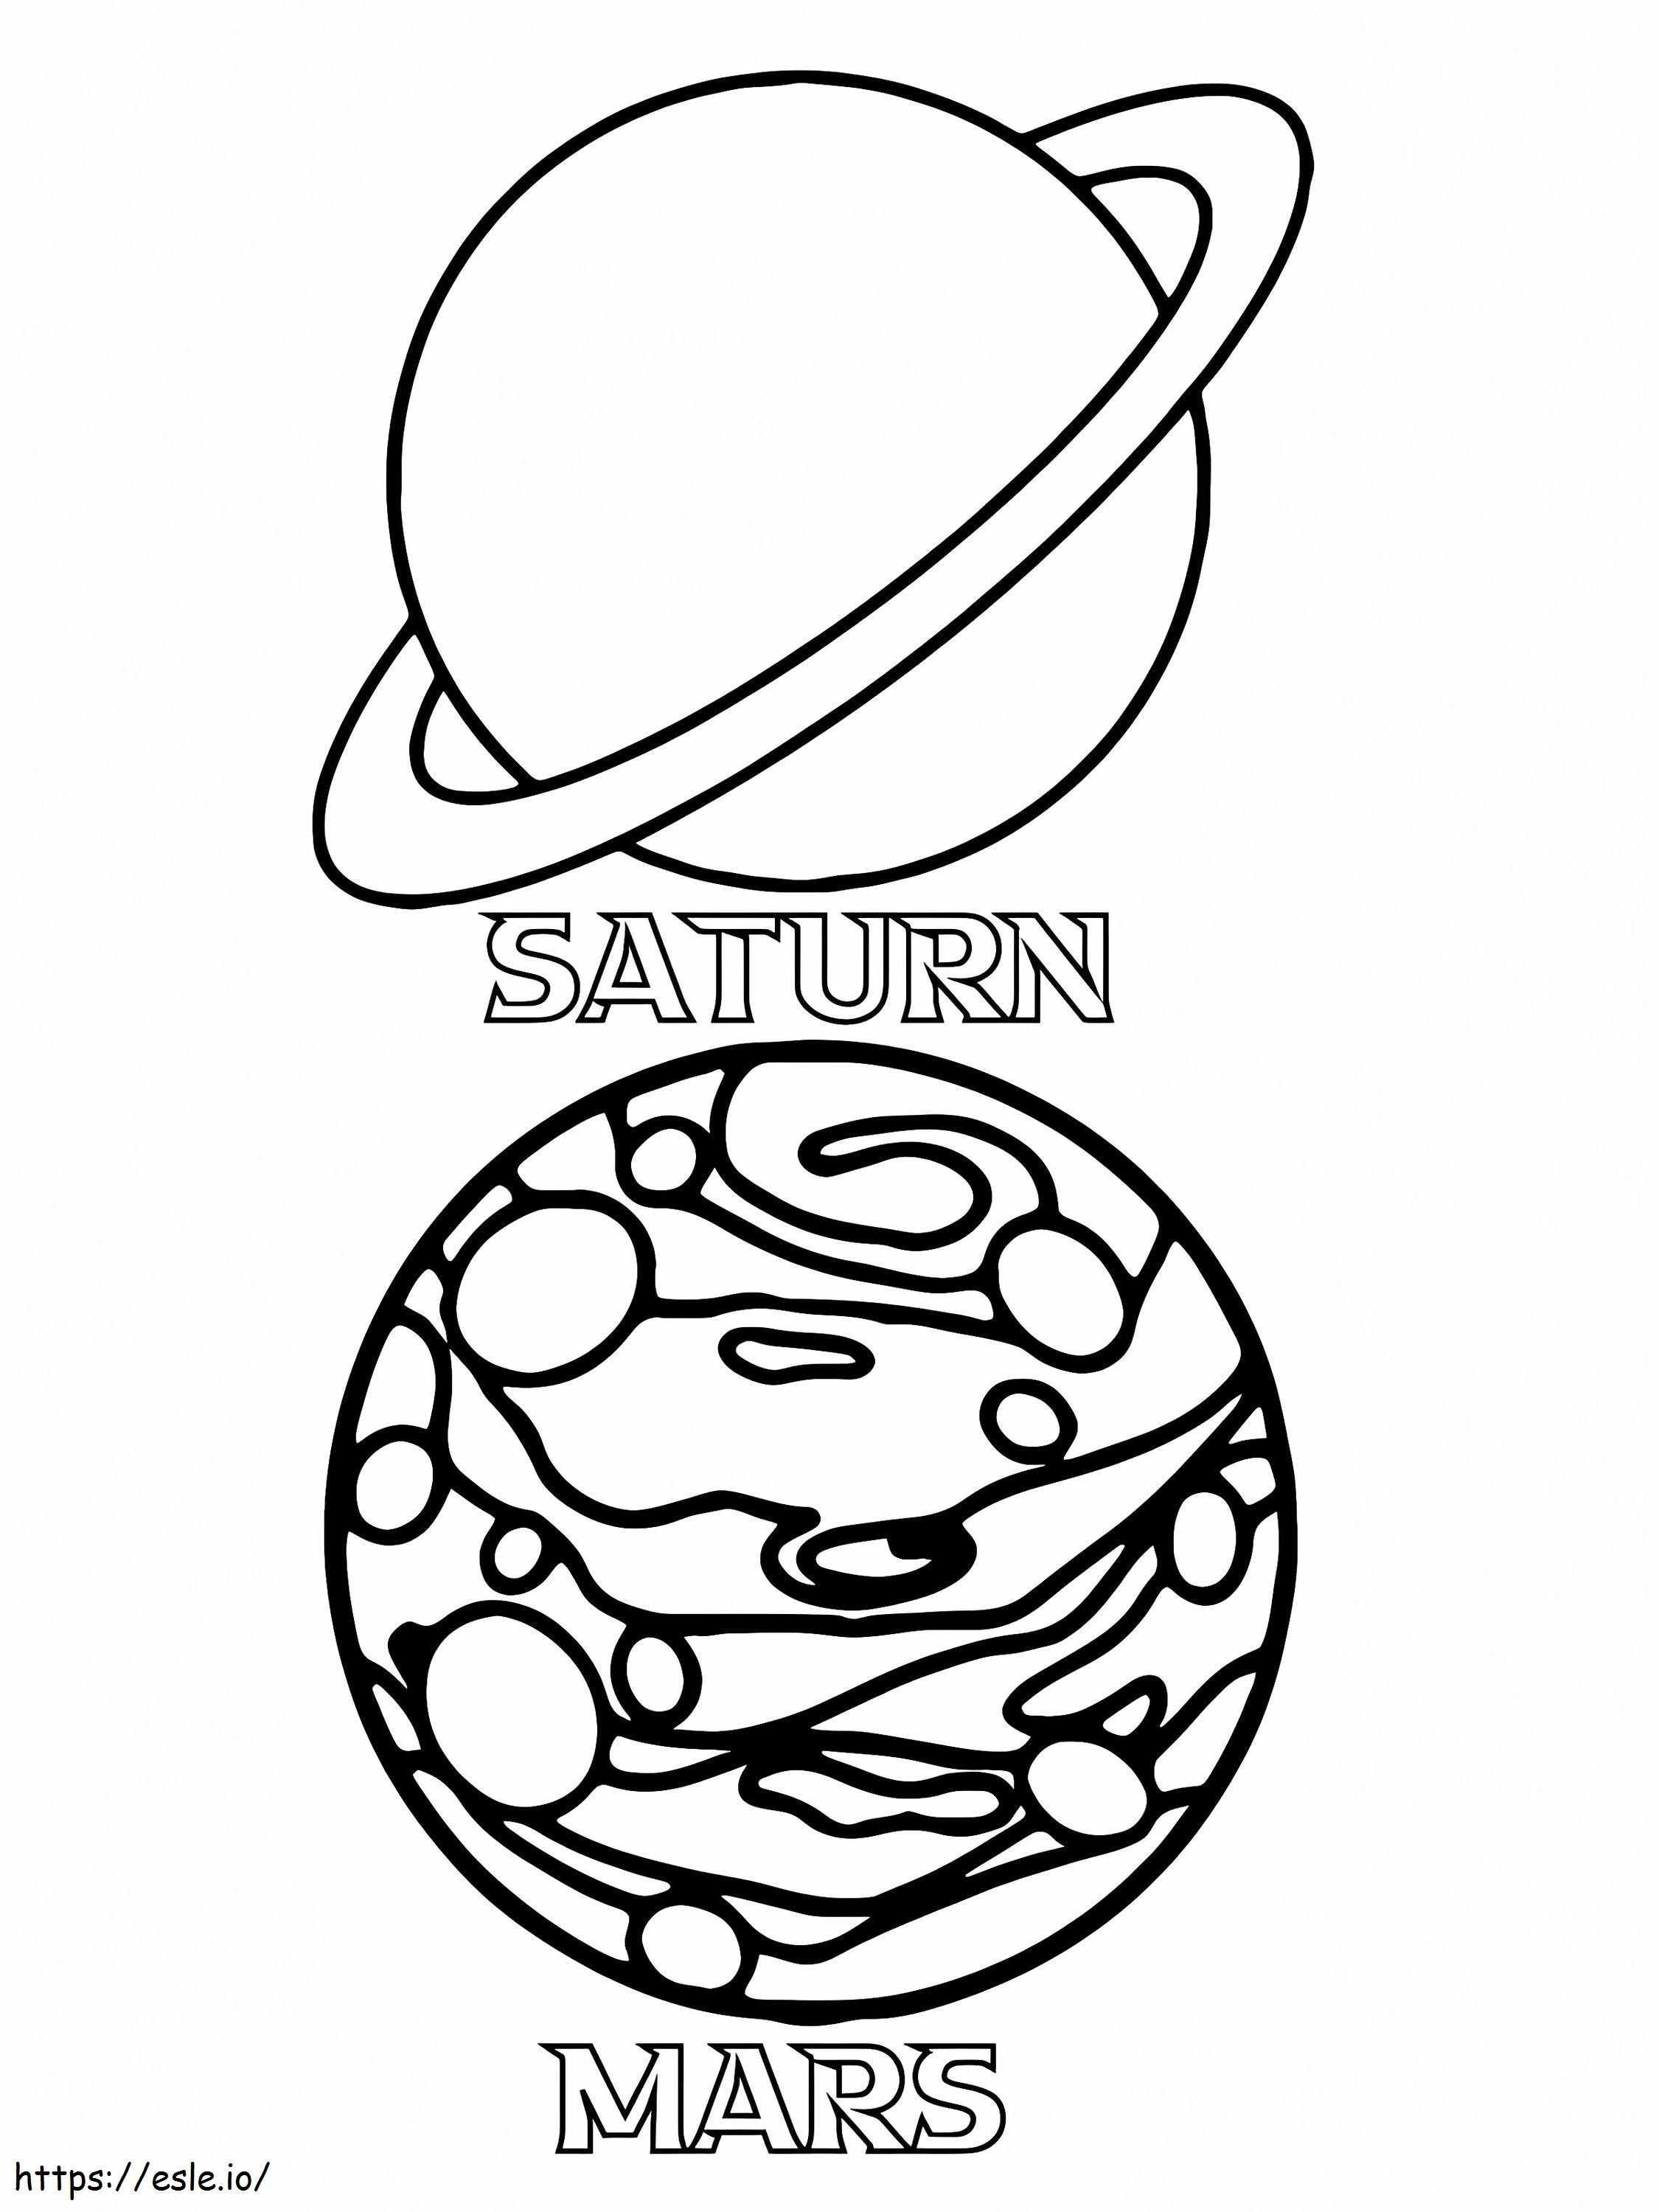 Saturn And Mars coloring page